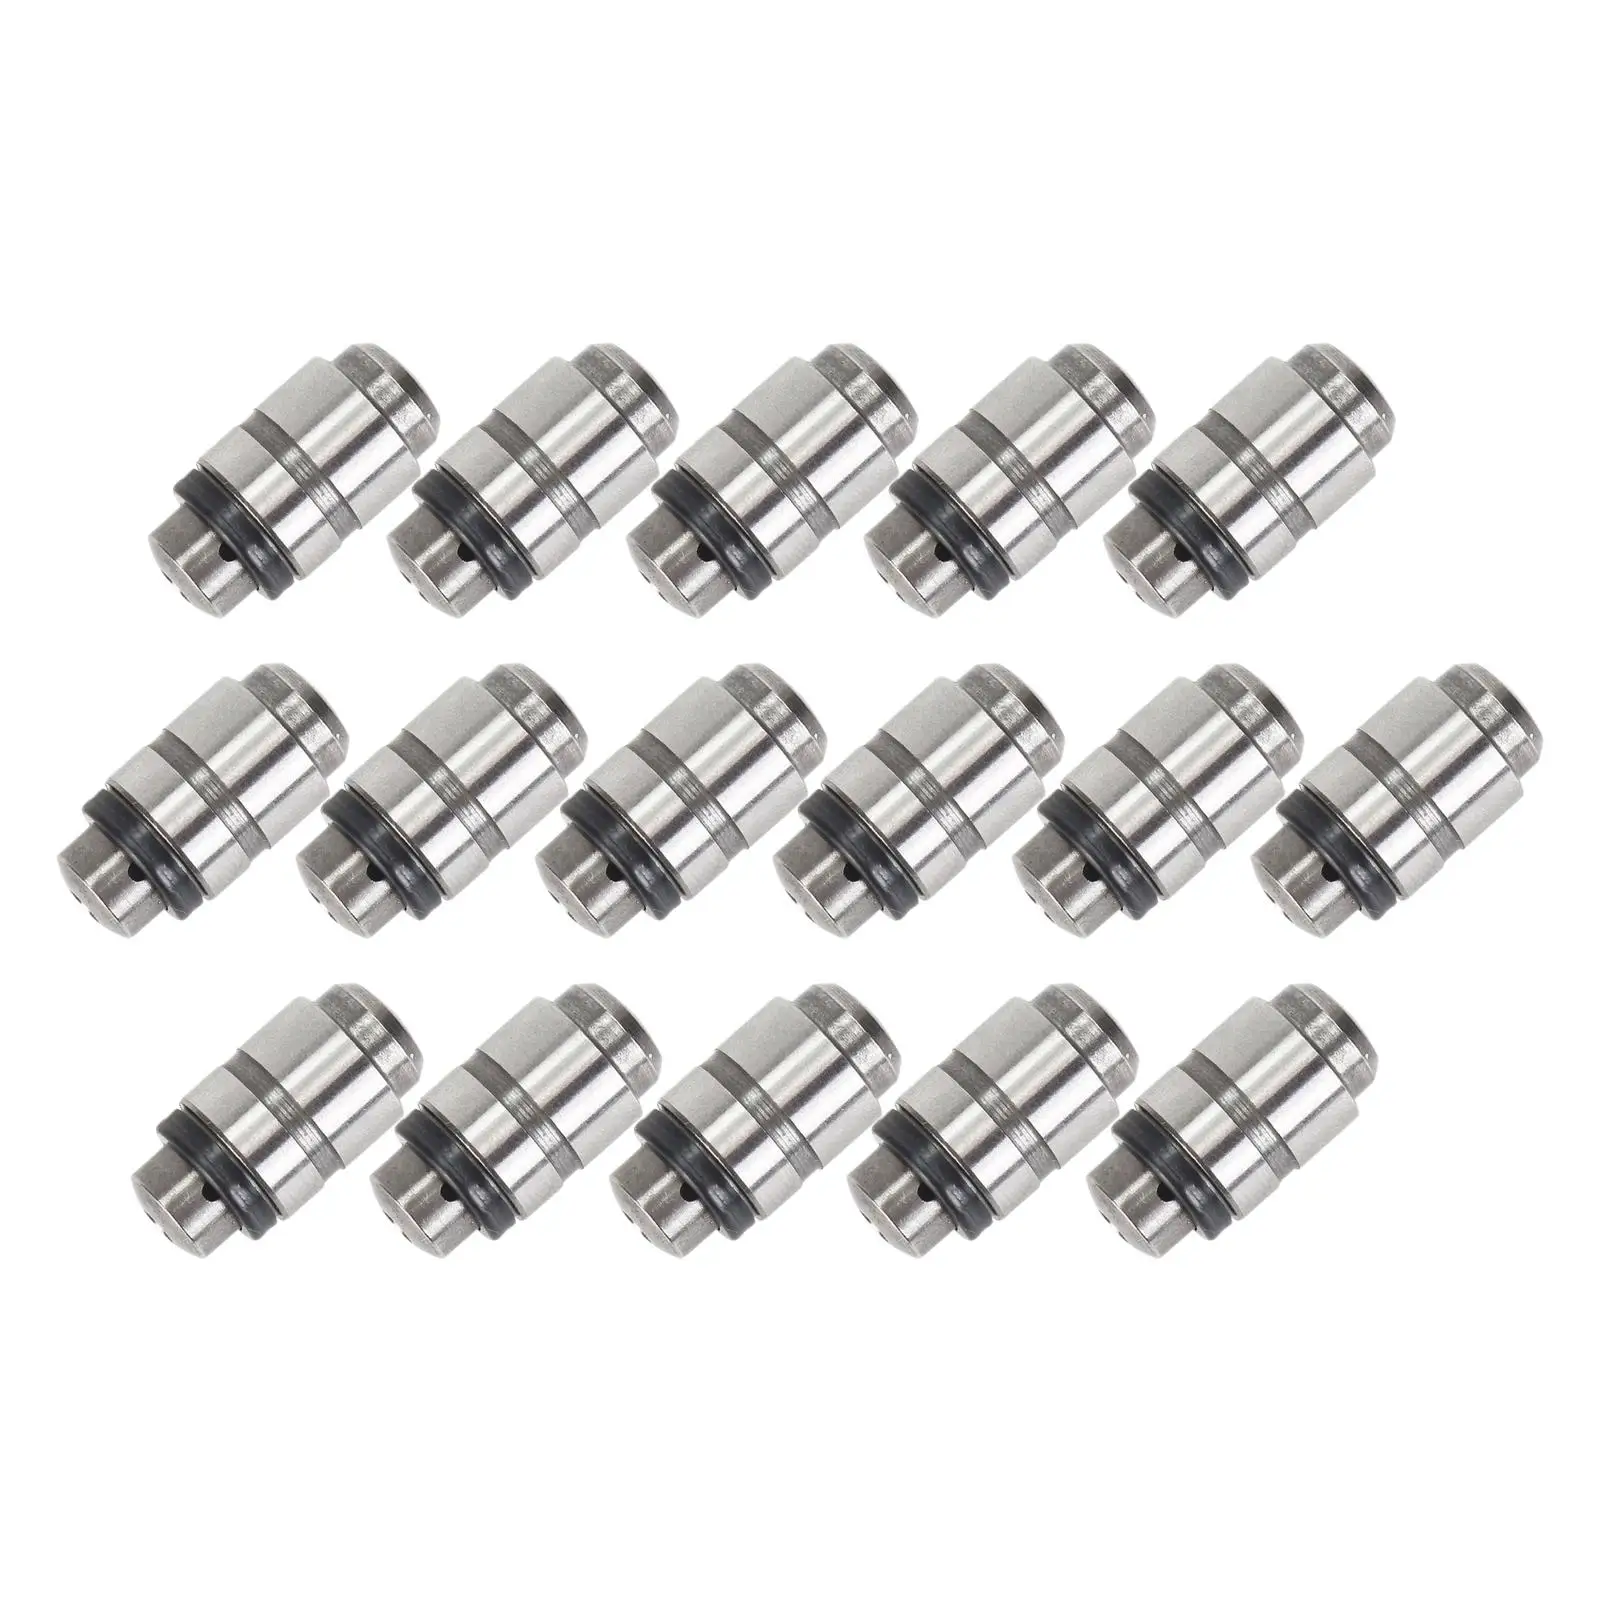 16-In-Pack Valve Tappets Lifters Kit Vehicle Parts Iron Assemblies Replaces for Mitsubishi 3.5L 3.8L 2131753 Car Supplies